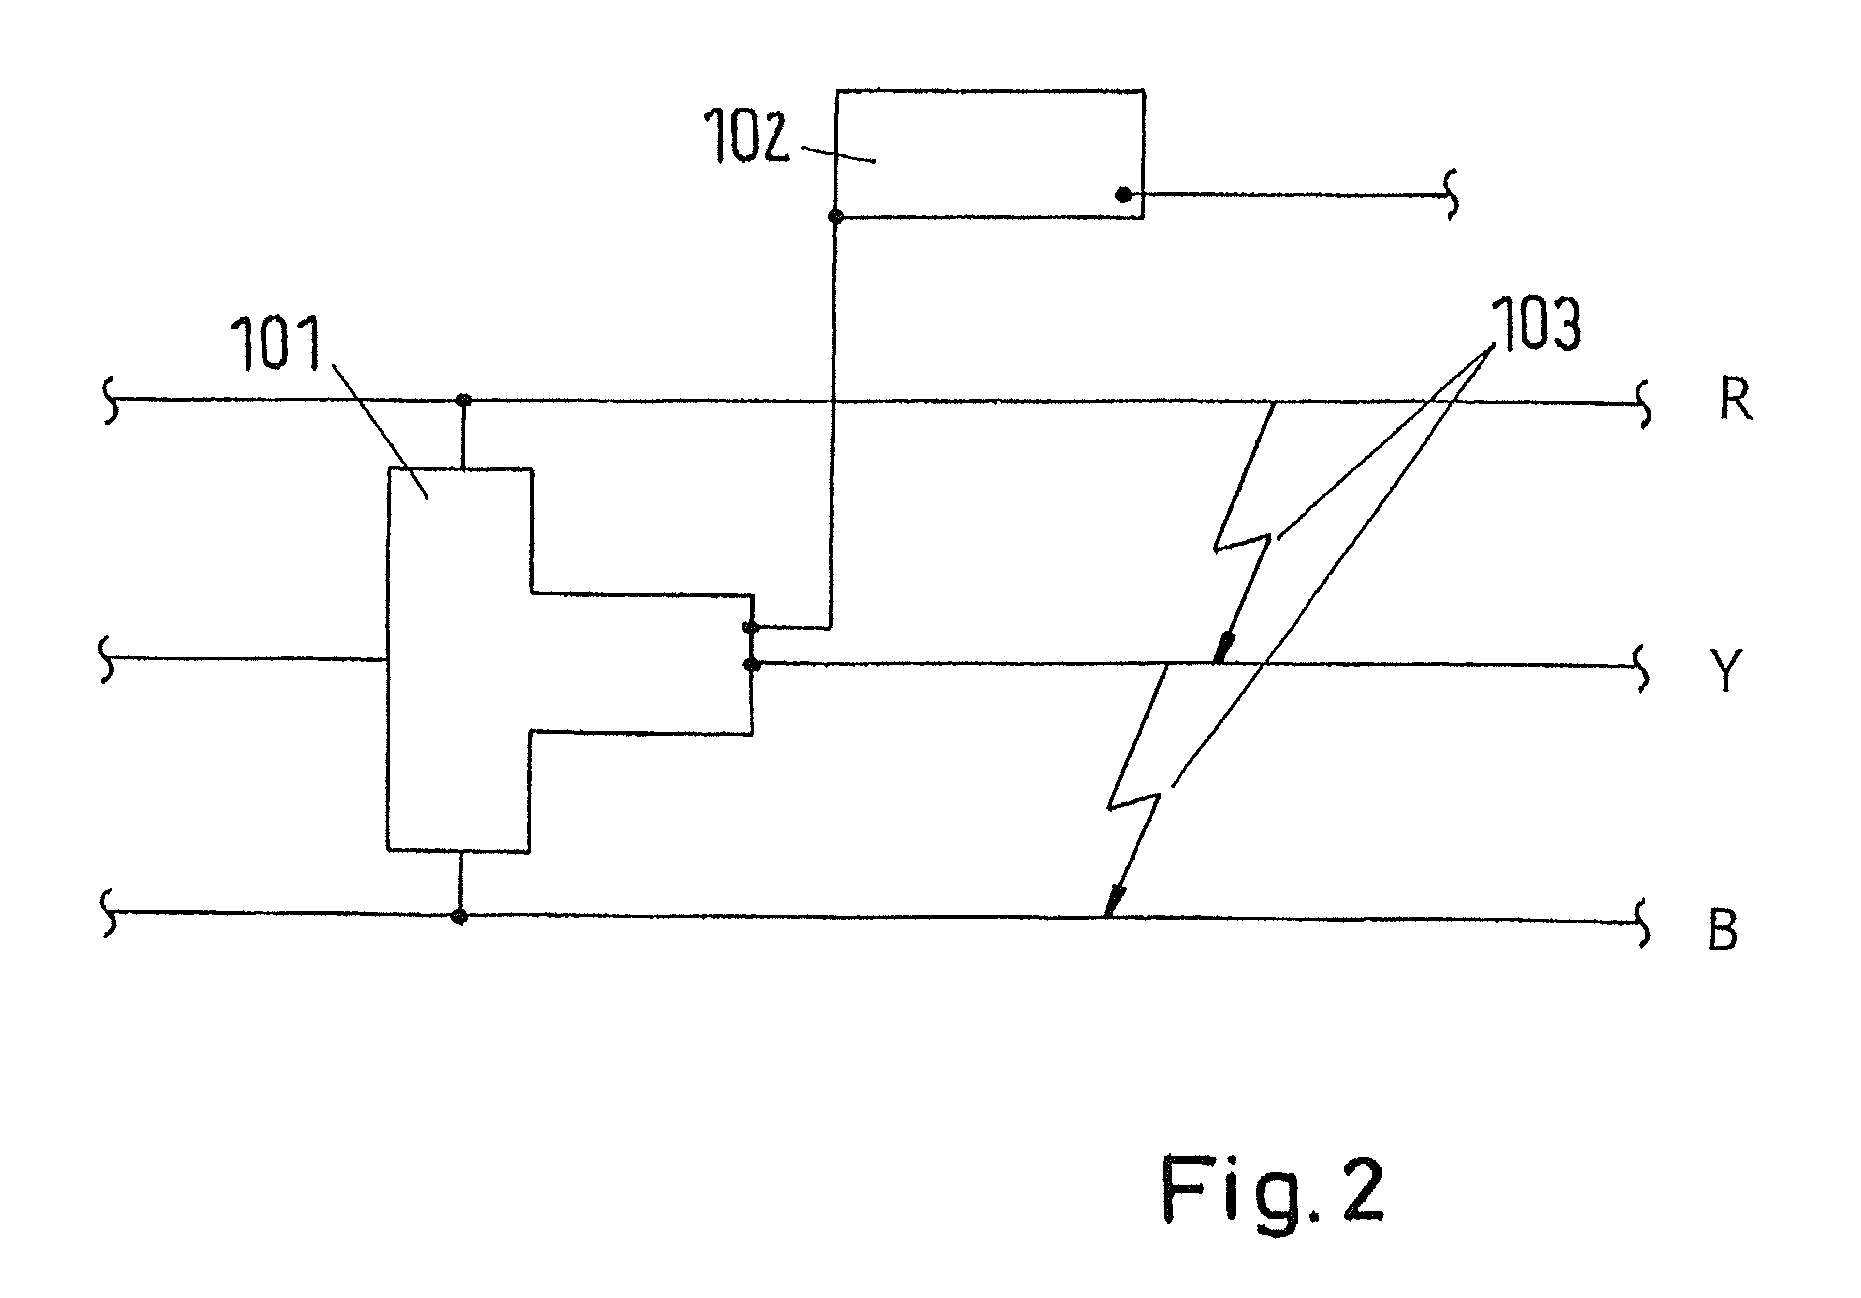 Low-voltage, medium-voltage or high-voltage switchgear assembly having a short-circuiting system